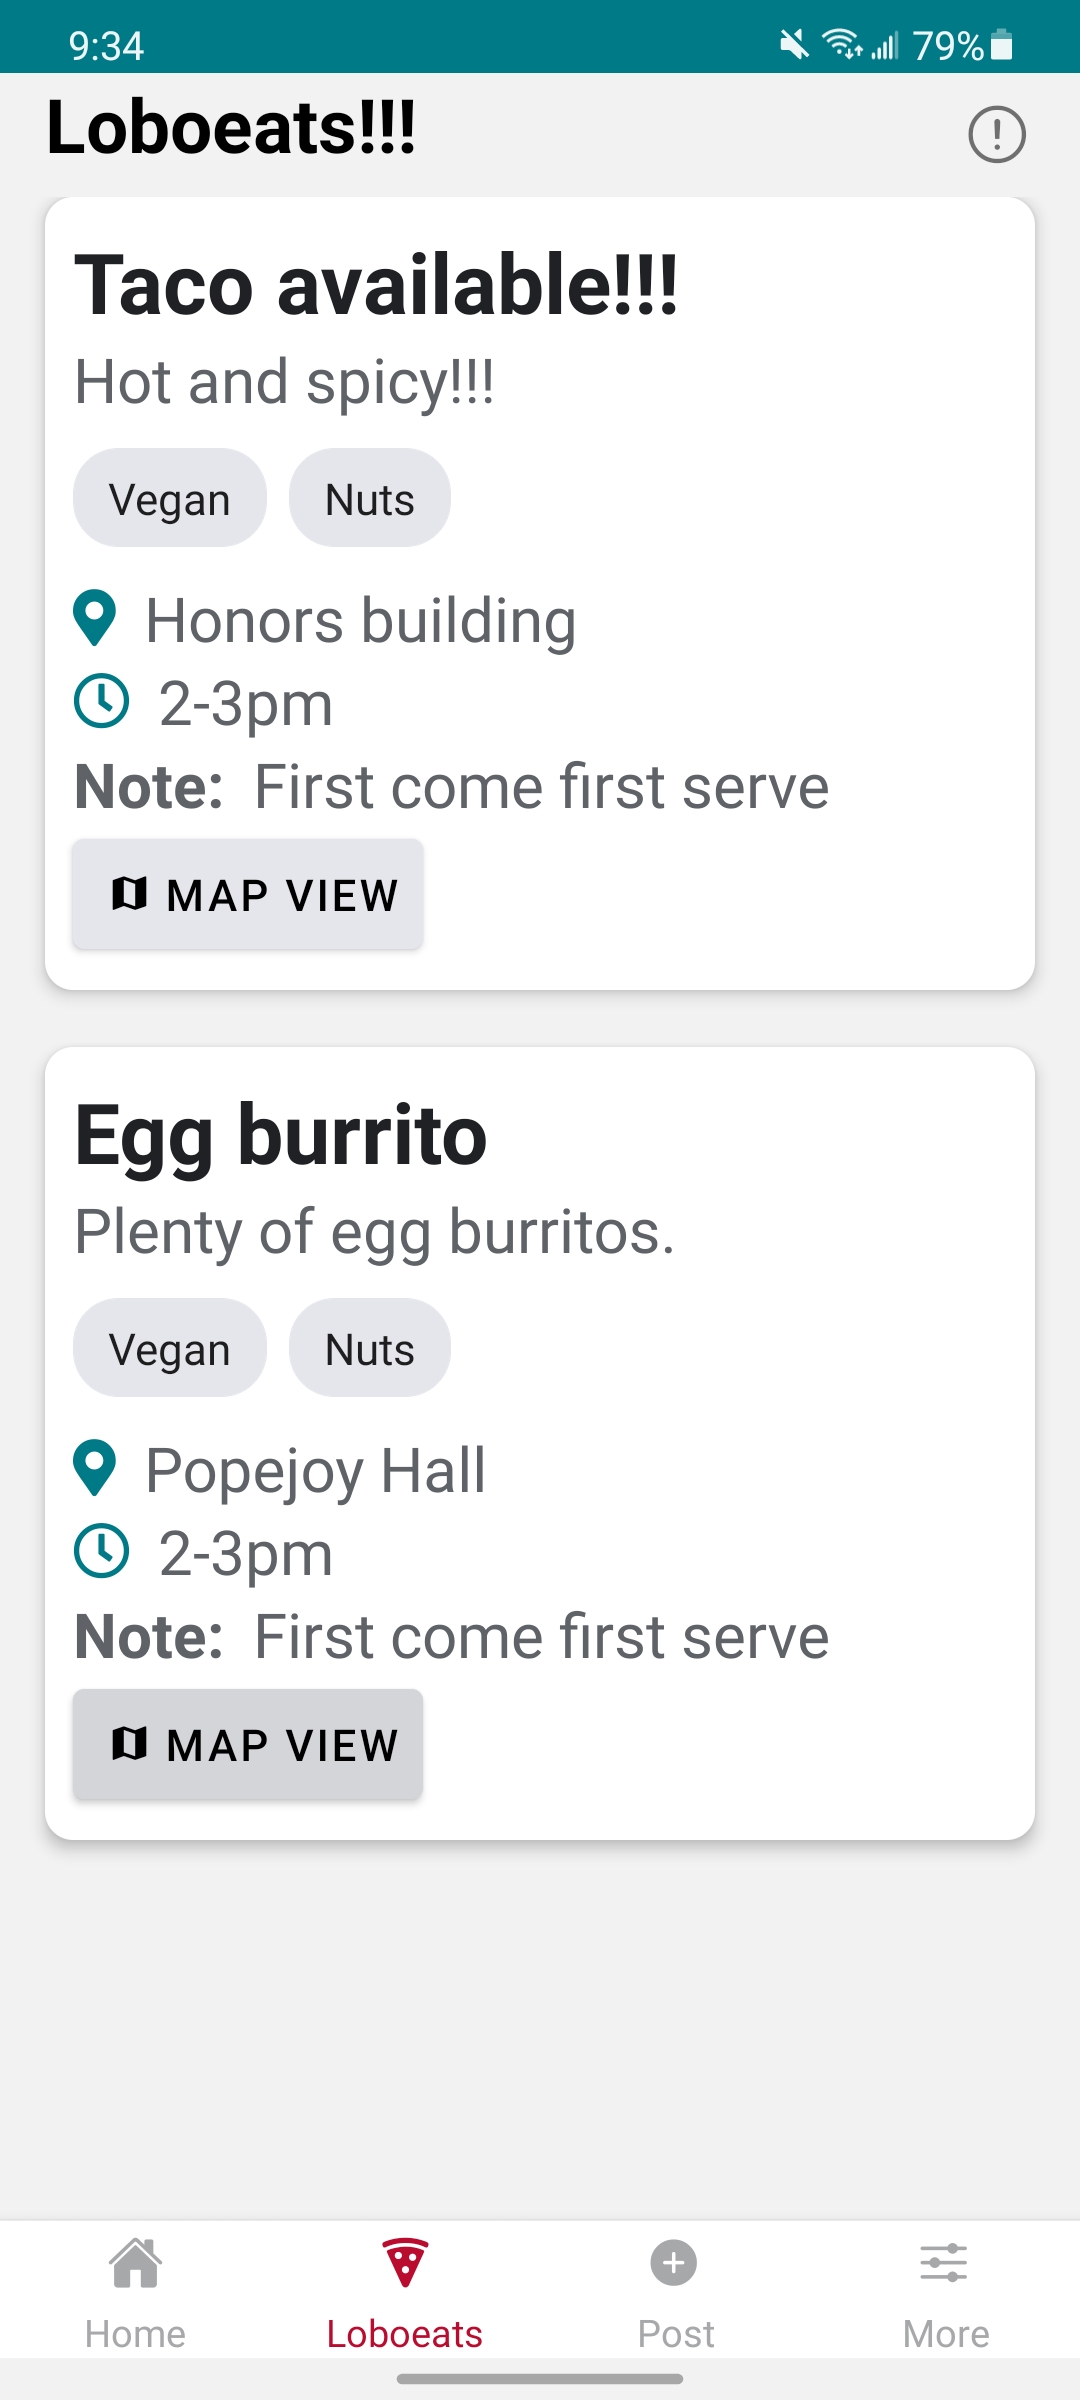 App screen showing places on campus to get food such as an egg burrito at popejoy hall